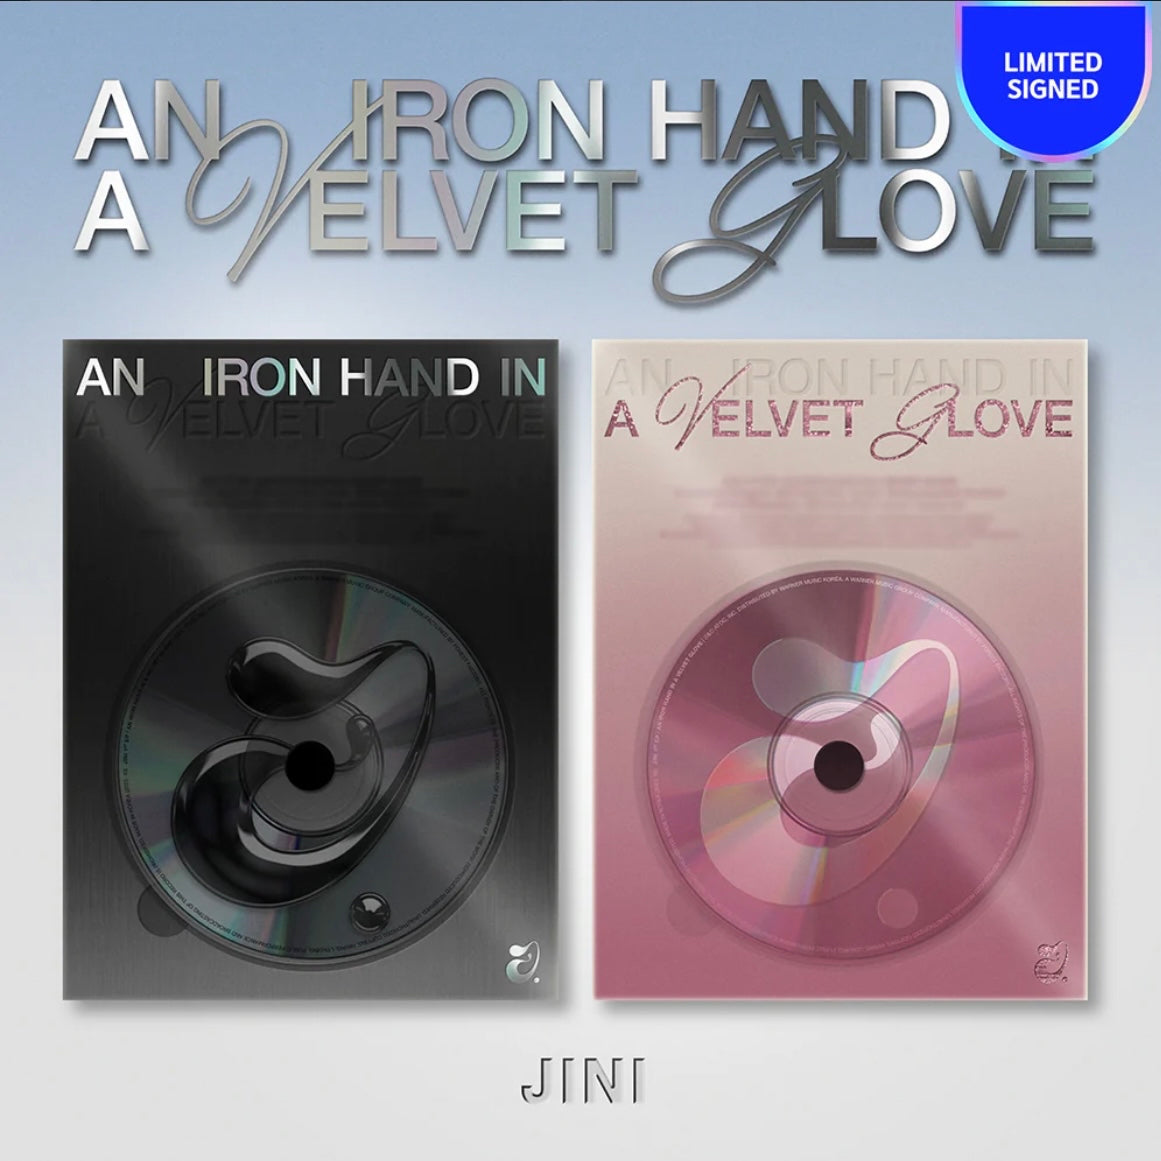 [HELLO82 SIGNED] JINI - AN IRON HAND IN A VELVET GLOVE + US EXCLUSIVE PHOTOCARD ✅